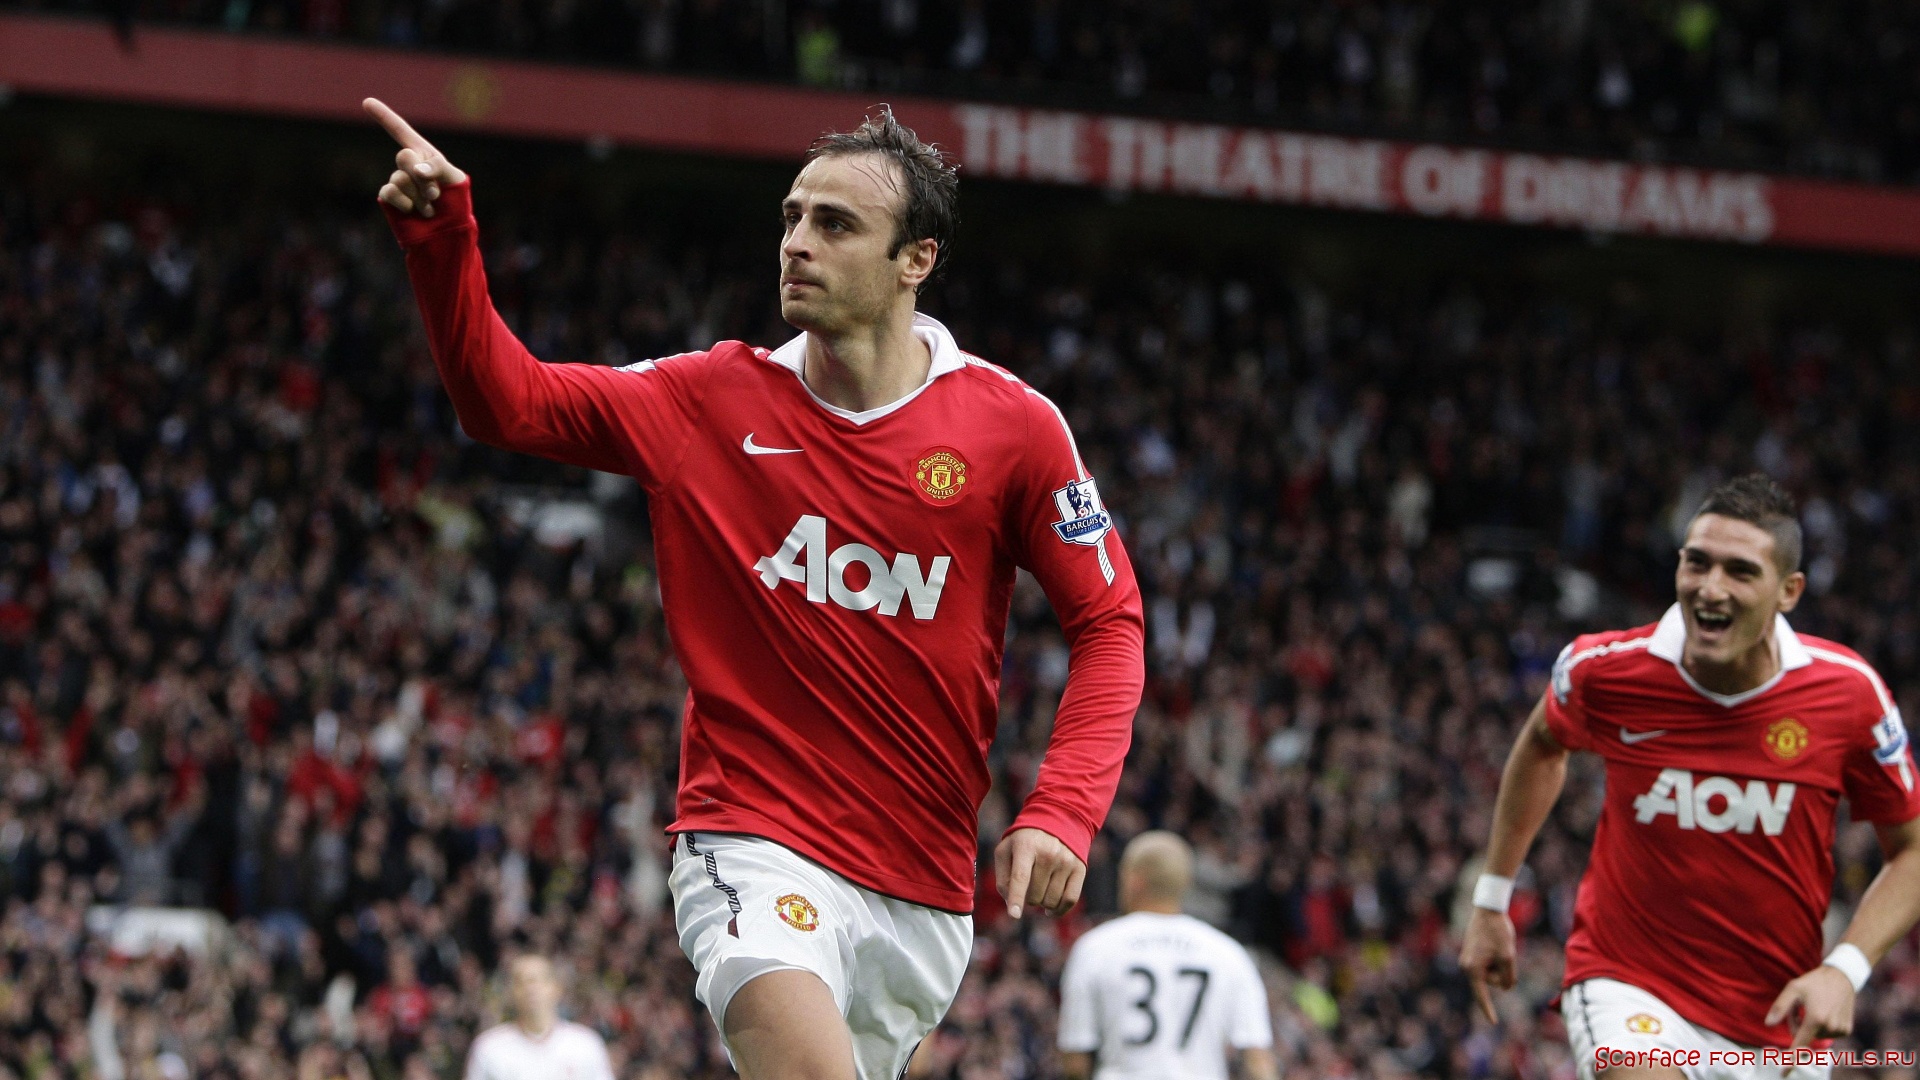 Scarface Manchester United 628694 Wallpaper Wallpaper - Dimitar Berbatov Manchester United 2010 - HD Wallpaper 